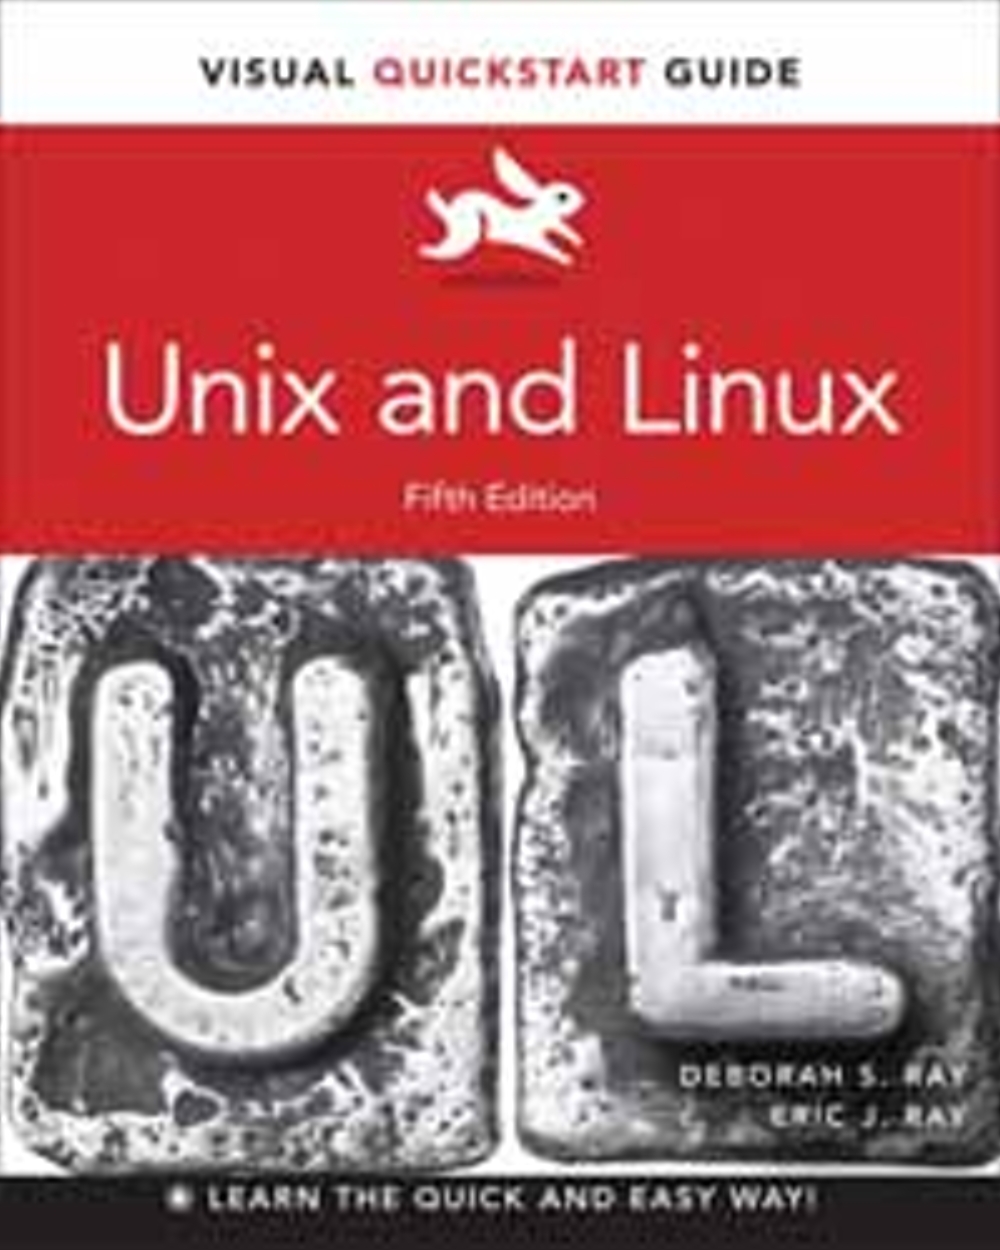 UNIX AND LINUX: VISUAL QUICKST...